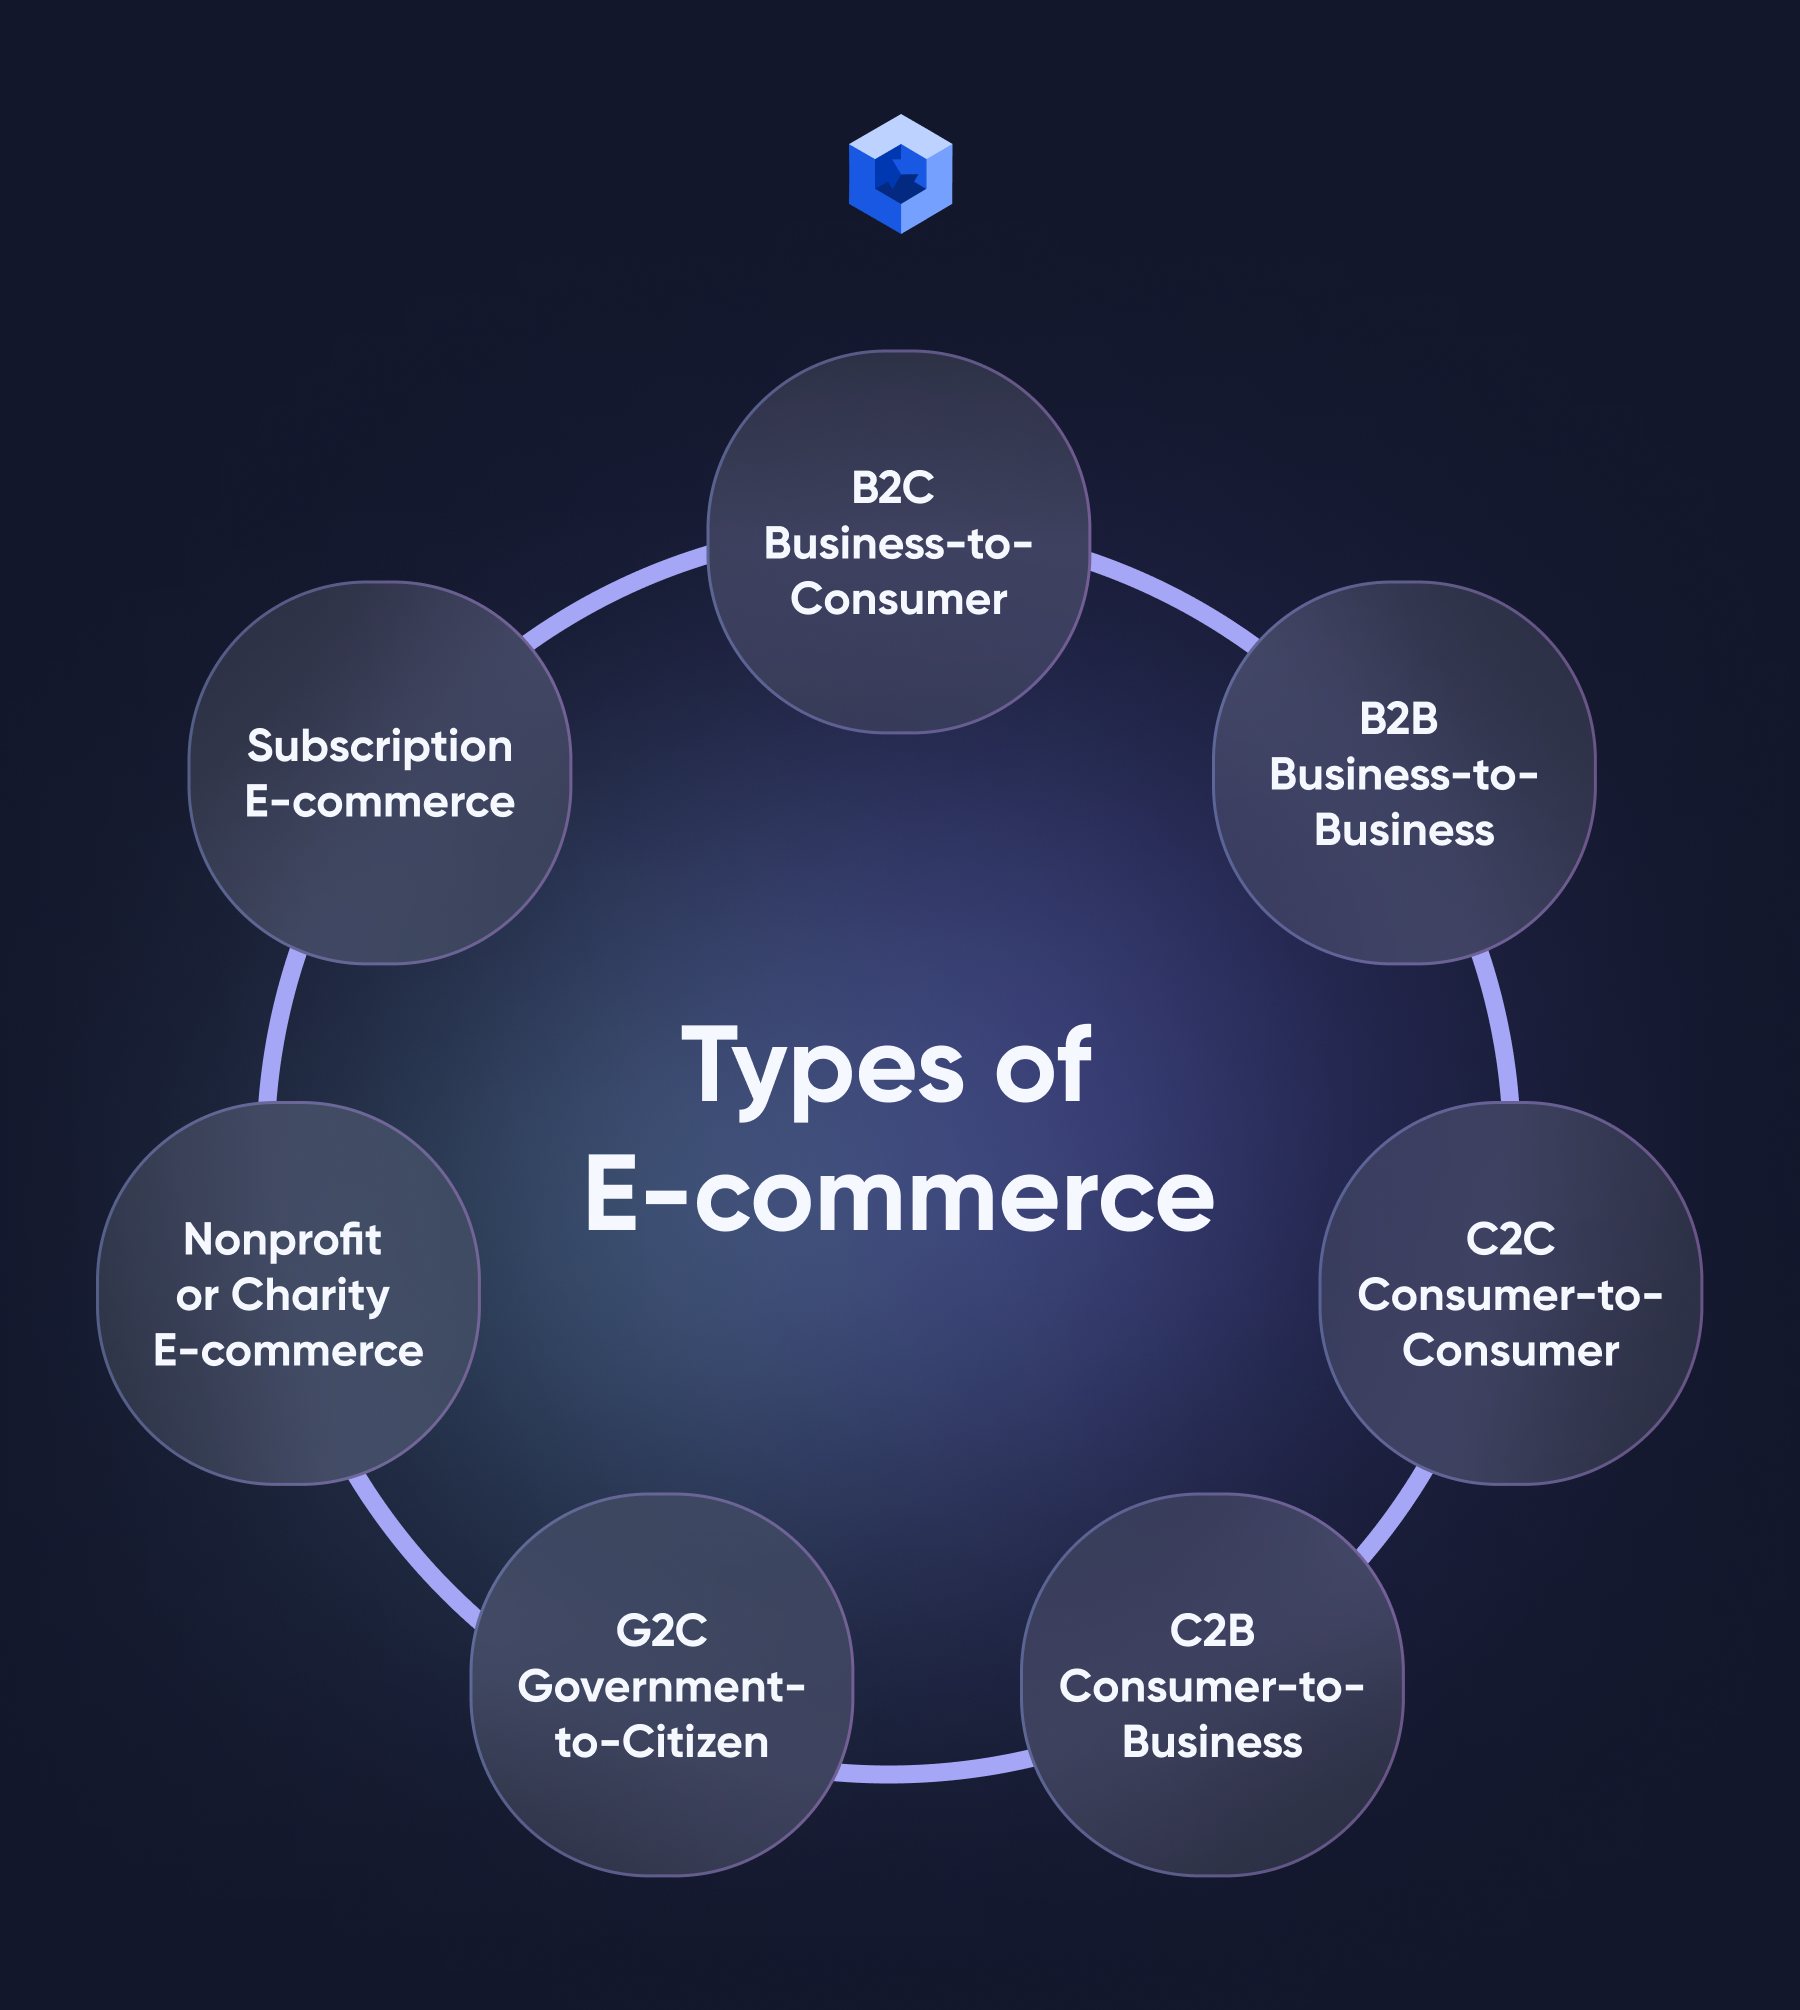 Varieties of e-commerce business types